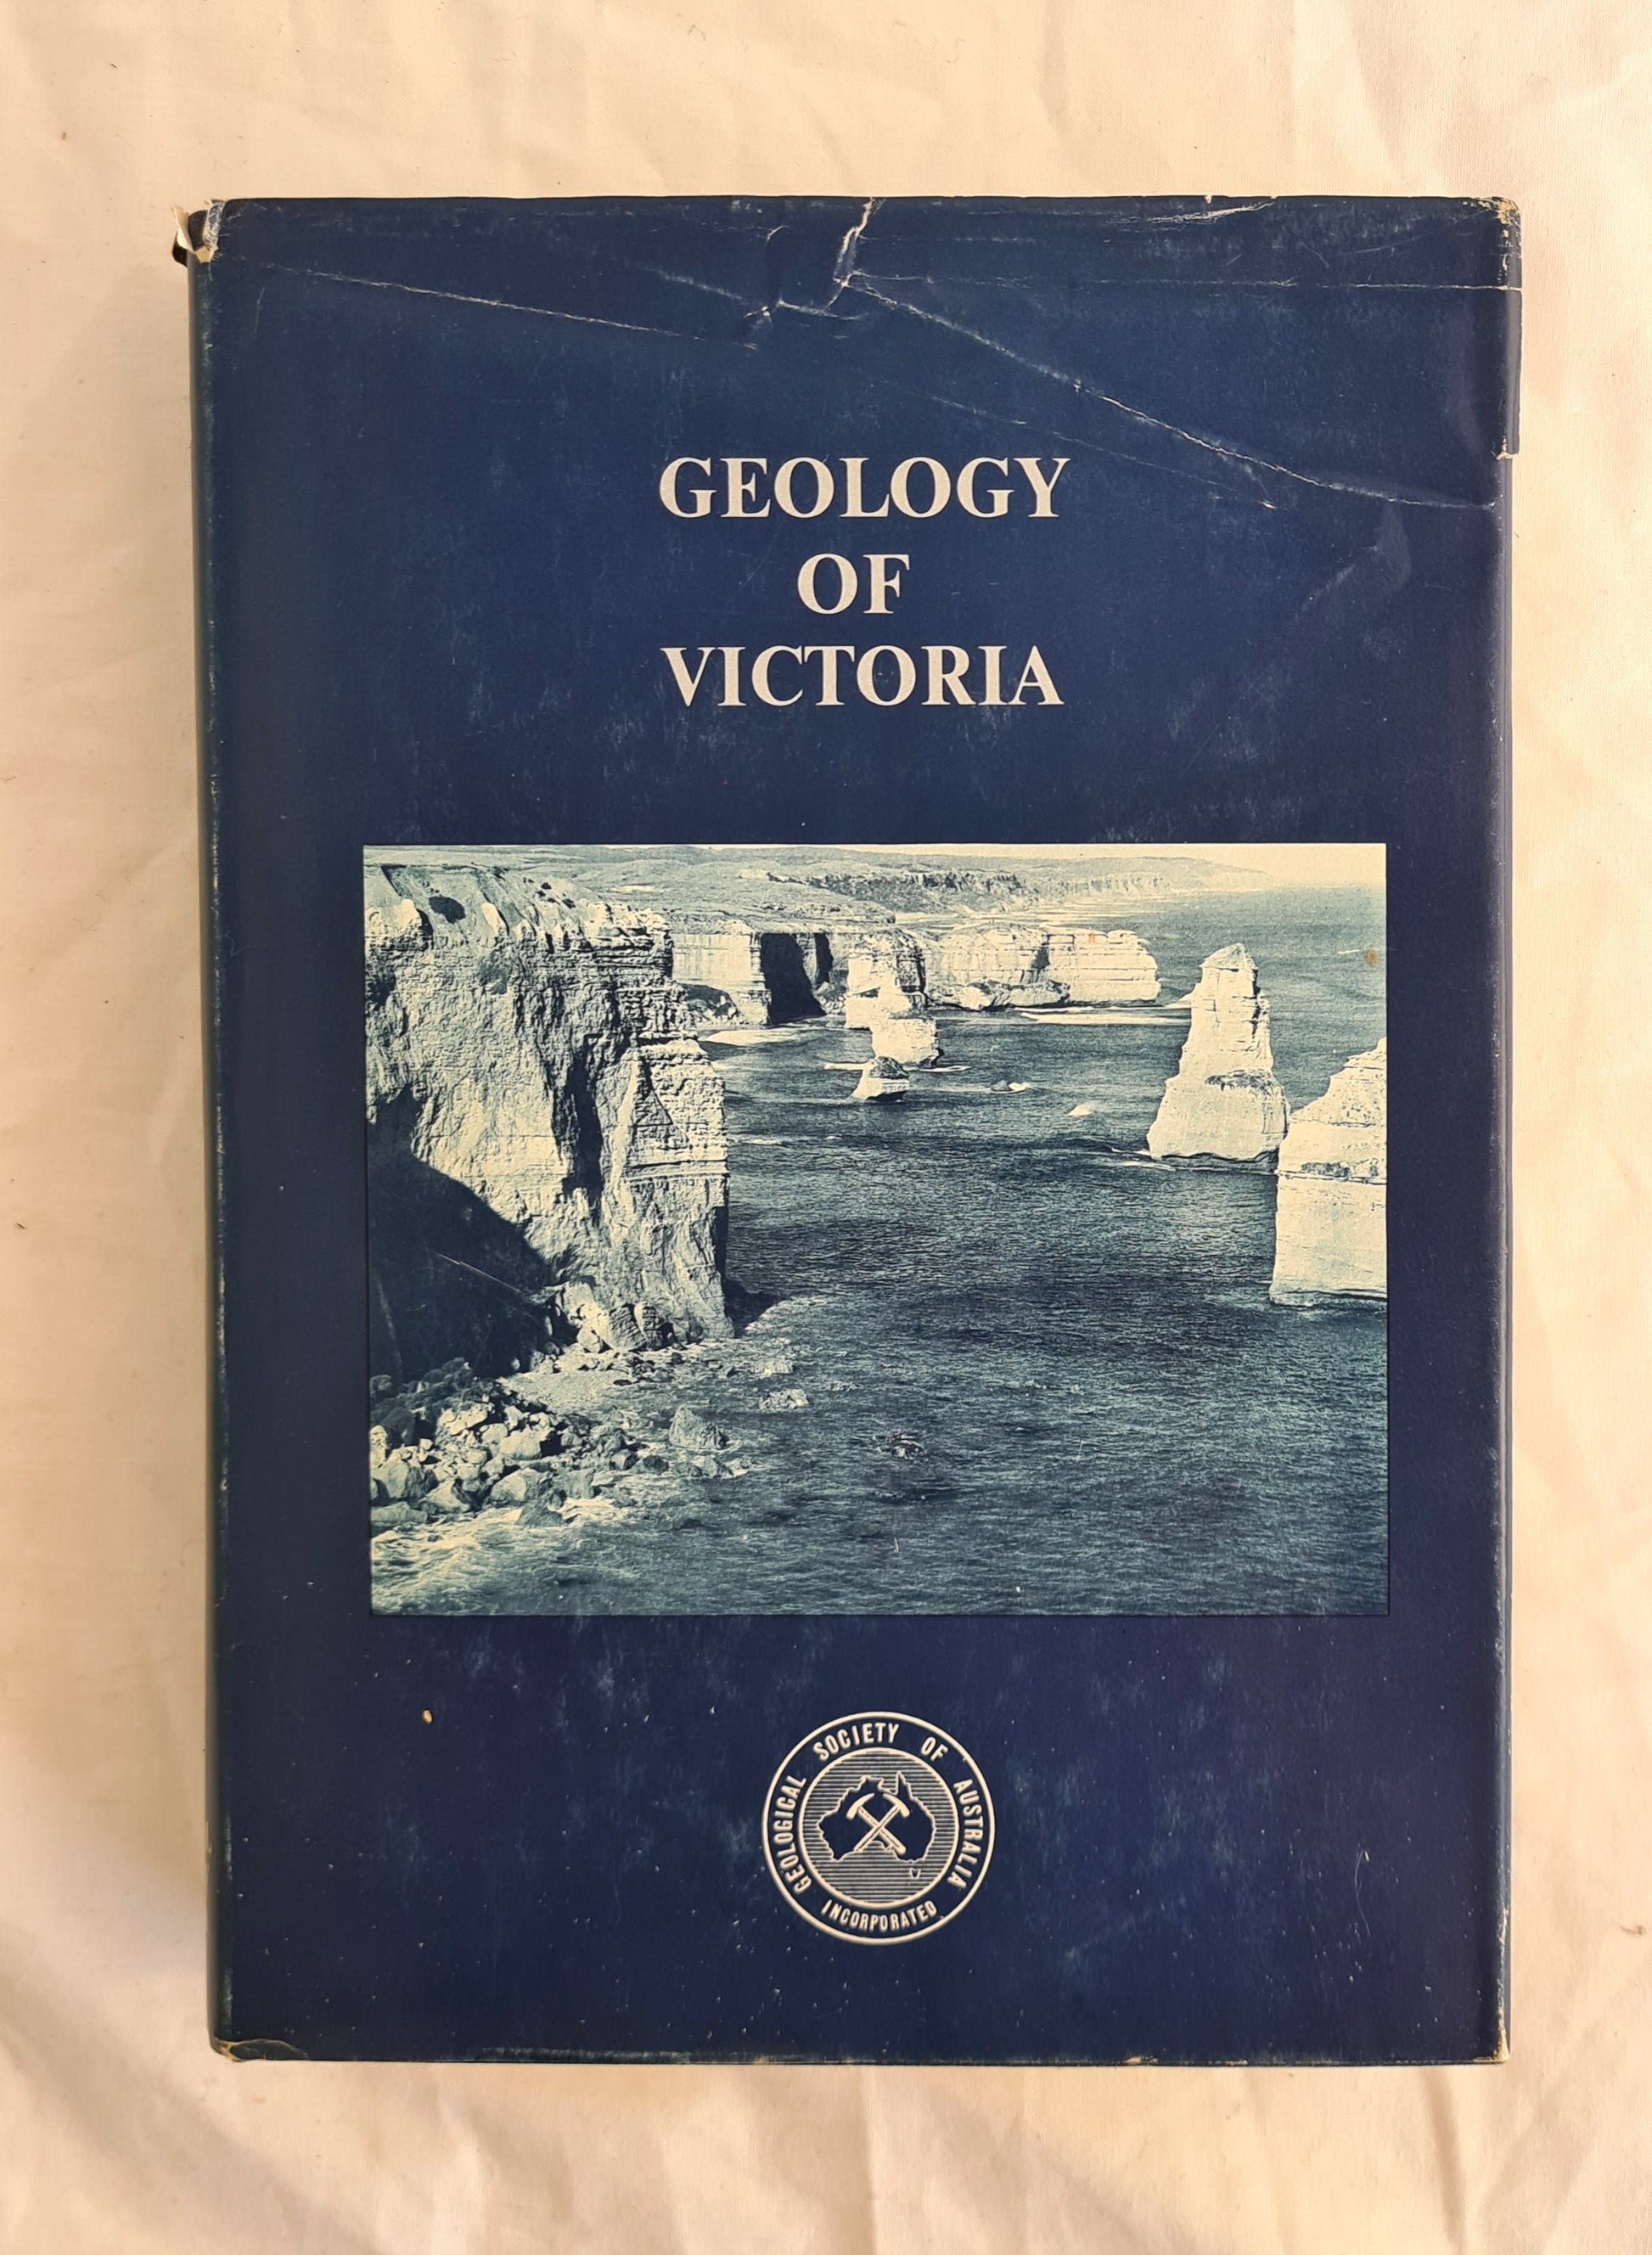 Geology of Victoria  Geological Society of Australia Special Publication No. 5  Edited by J. G. Douglas and J. A. Ferguson